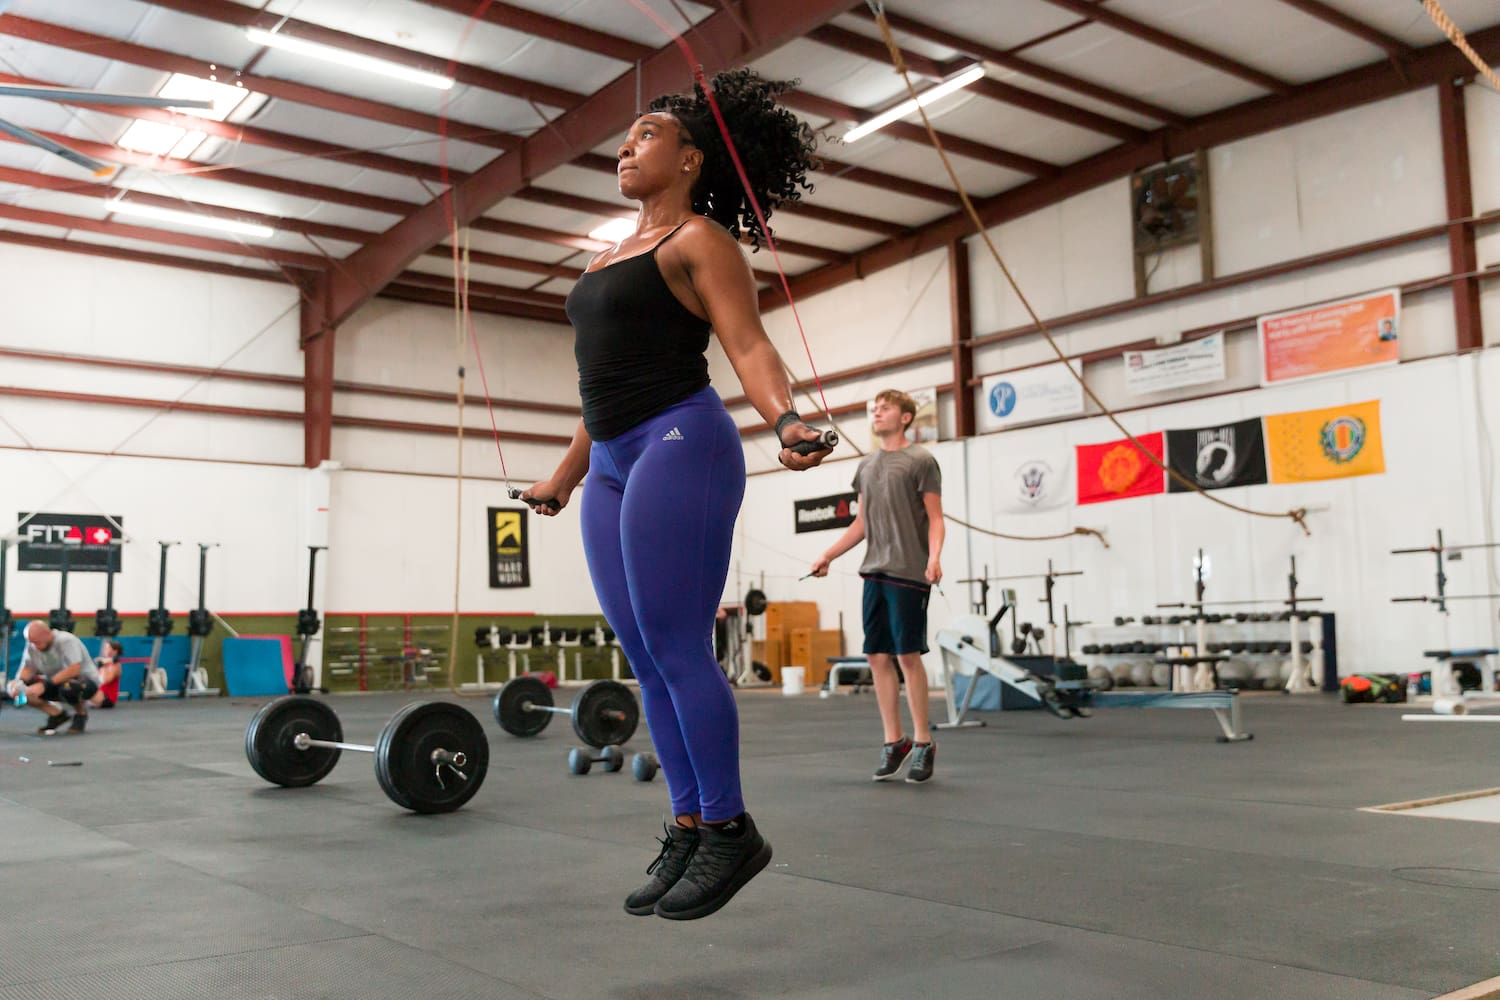 The Benefits of Double-Unders & How to Avoid Injury